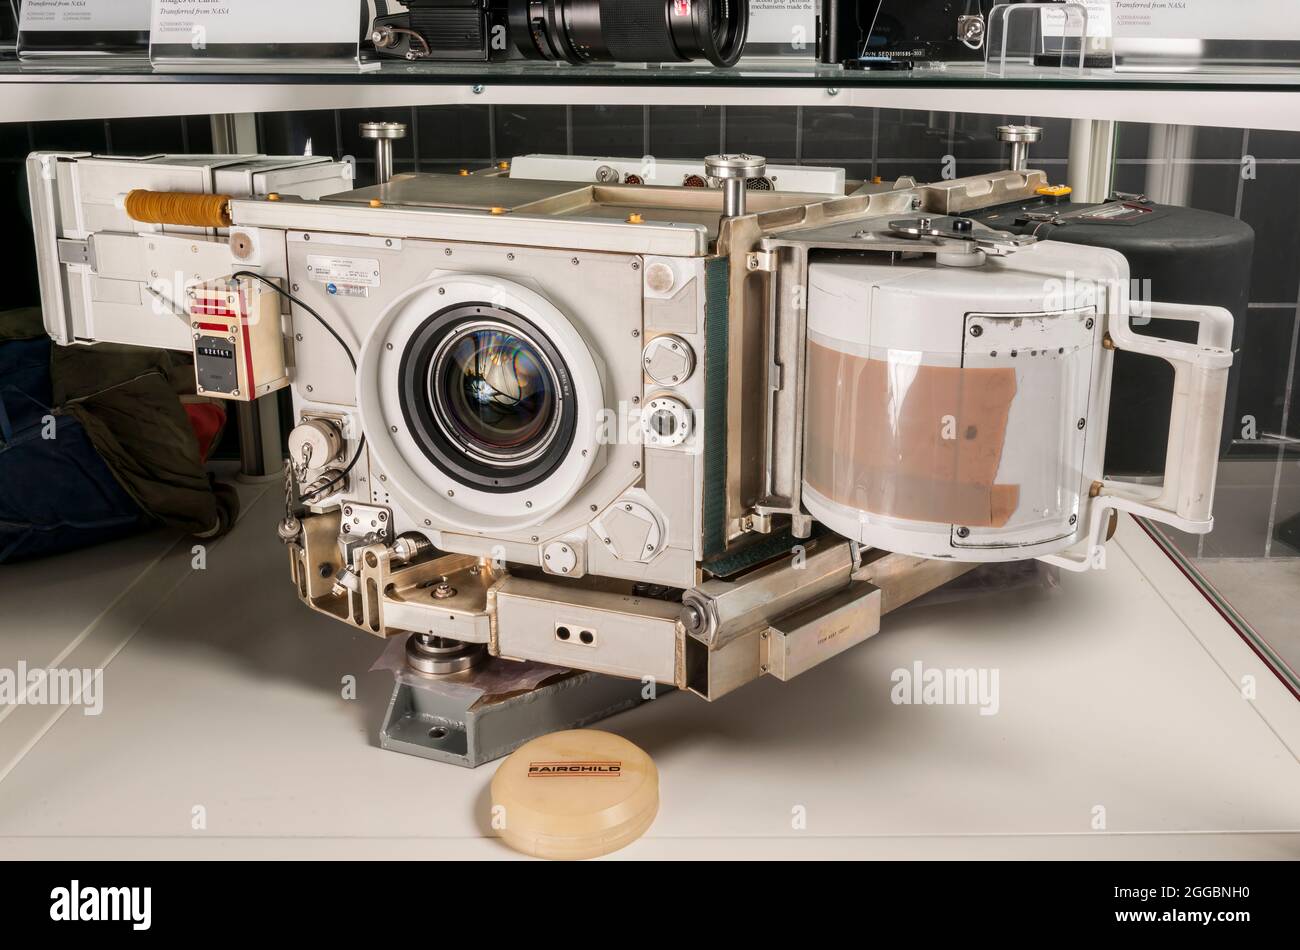 This is the flight backup for the mapping cameras used on the last three Apollo missions. Mapping the lunar surface was a high priority during Apollo 15, 16, and 17. Mounted in the service module, the mapping camera captured high-resolution images of the Moon as the spacecraft orbited. While returning to Earth, command module pilots performed spacewalks to retrieve the film canisters, mounted on the right side of the camera. This flight backup, available for those missions if the installed cameras were damaged or malfunctioned before launch, is the best surviving example of the Fairchild-built Stock Photo